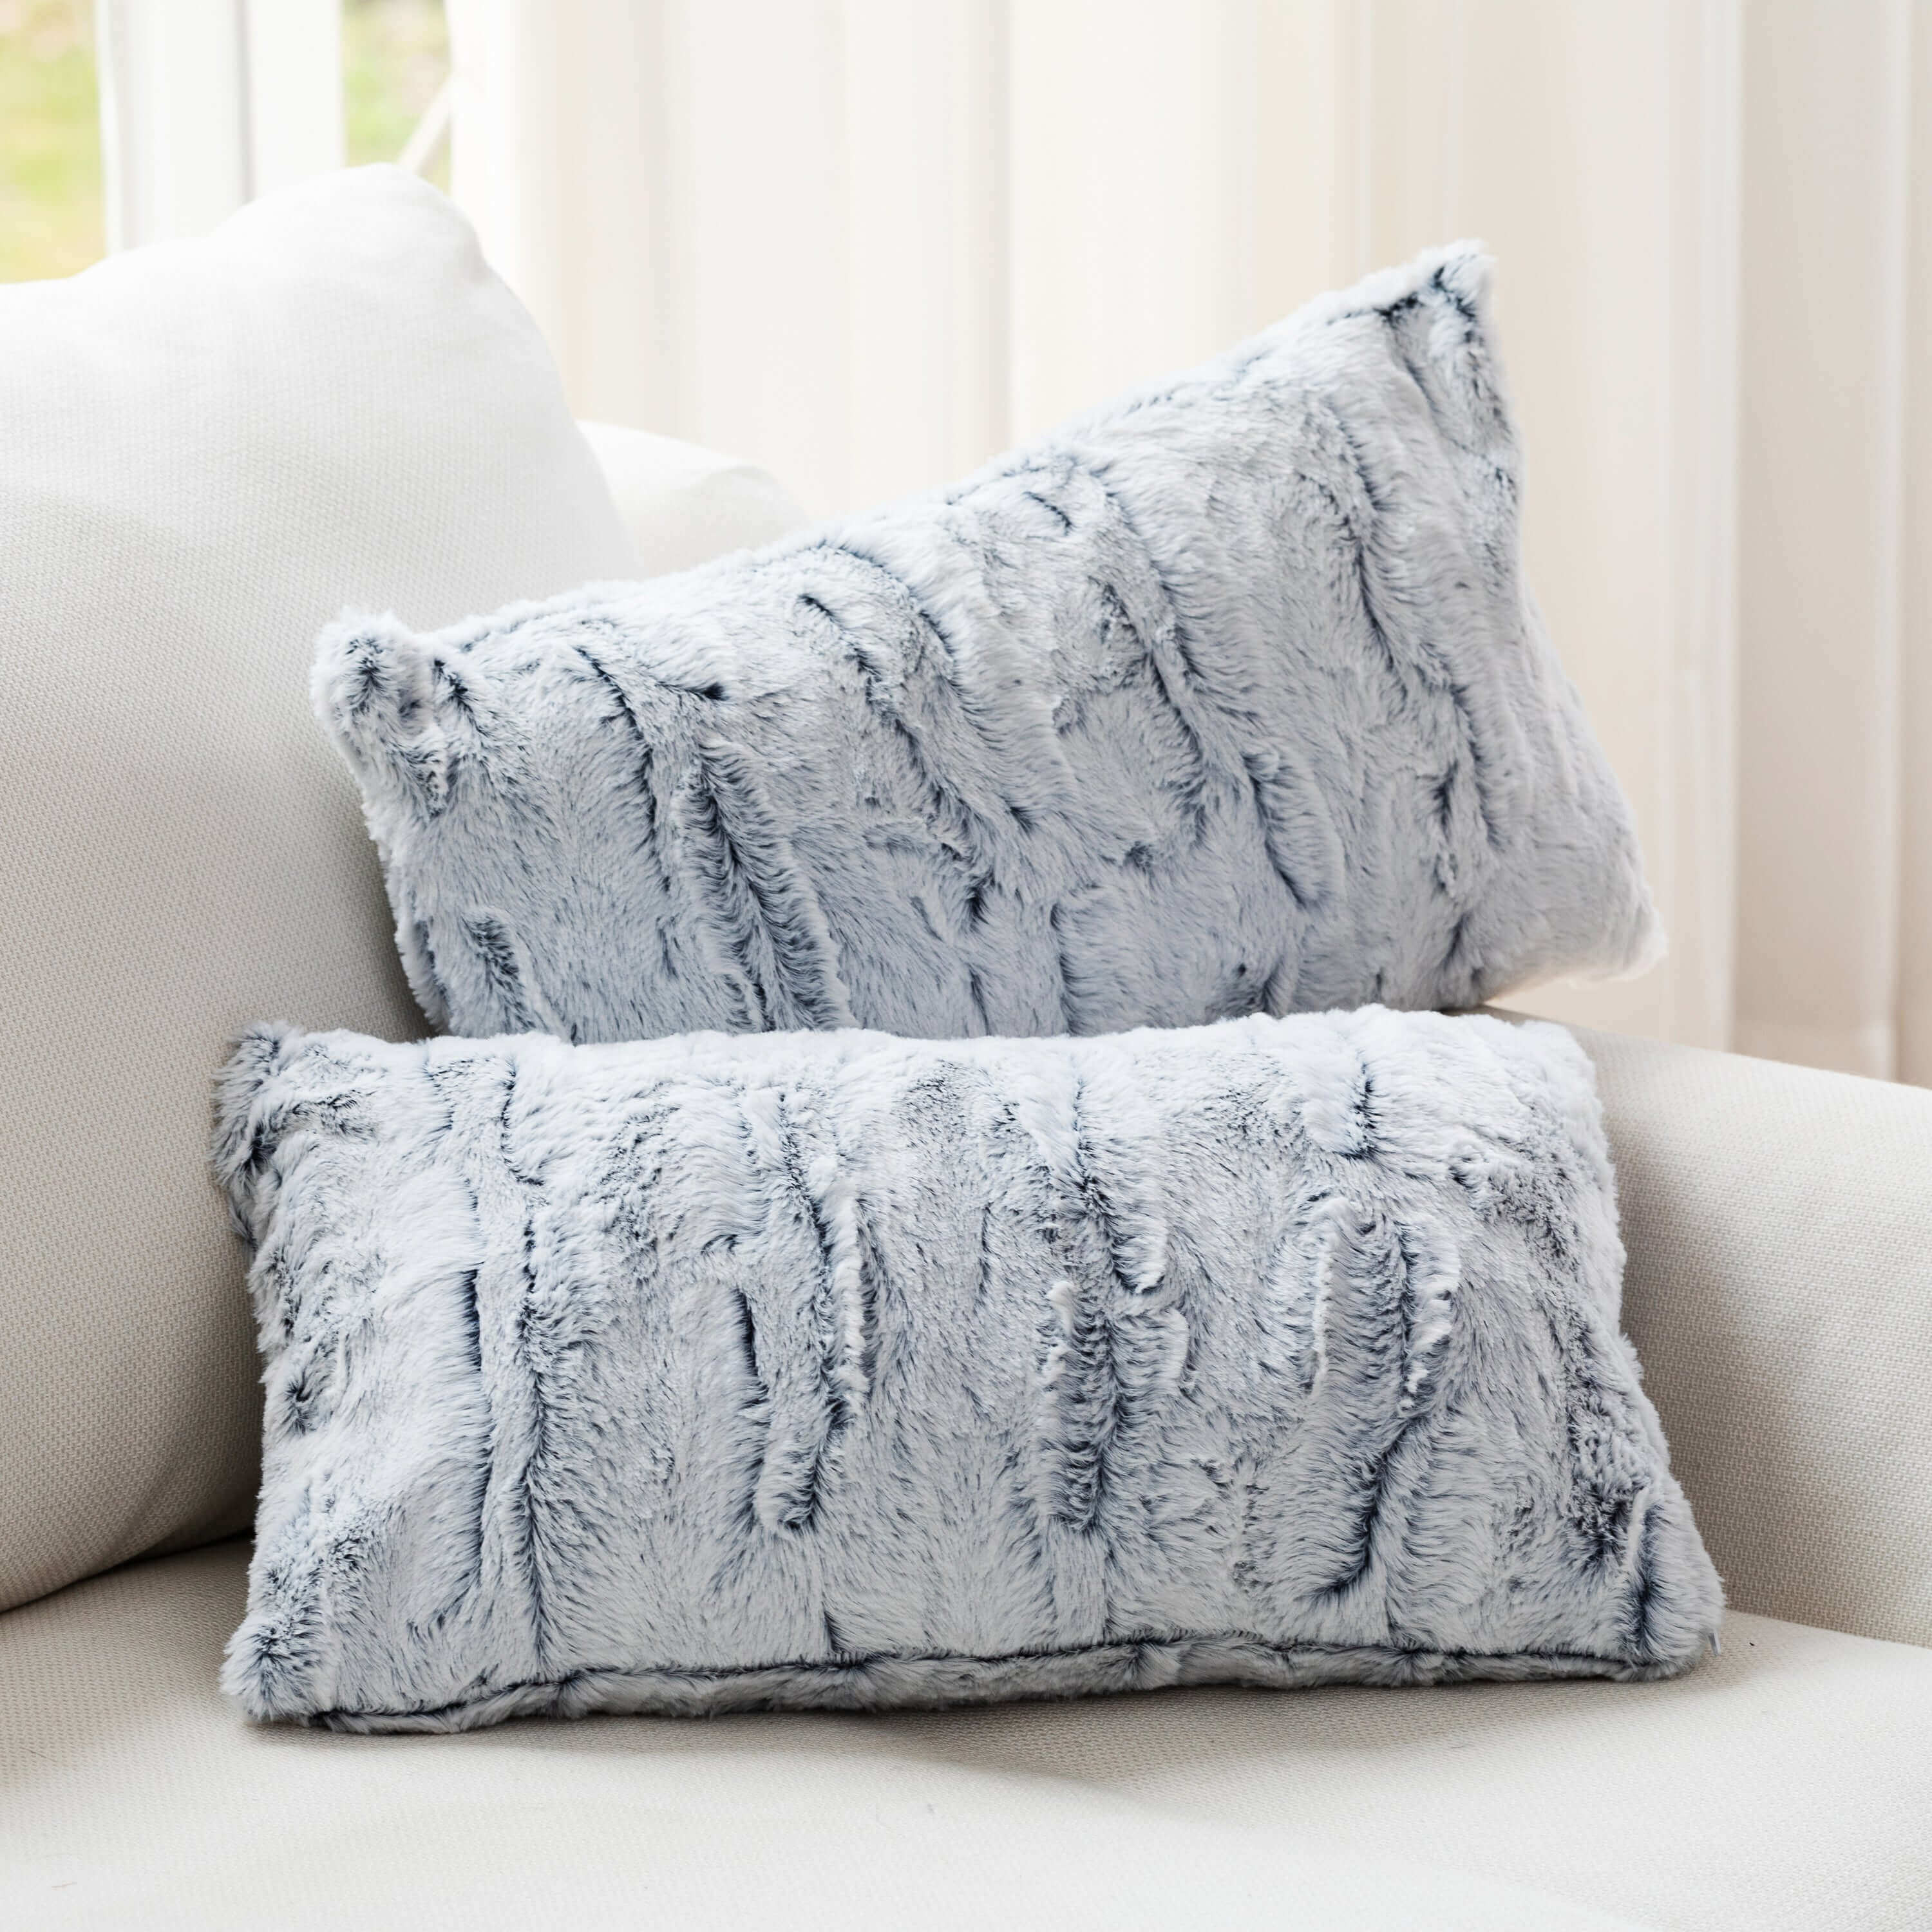 https://cdn.shopify.com/s/files/1/2091/6511/products/cheer-collection-embossed-faux-fur-throw-pillows-12-x-20-whiteblue-112816.jpg?v=1672304300